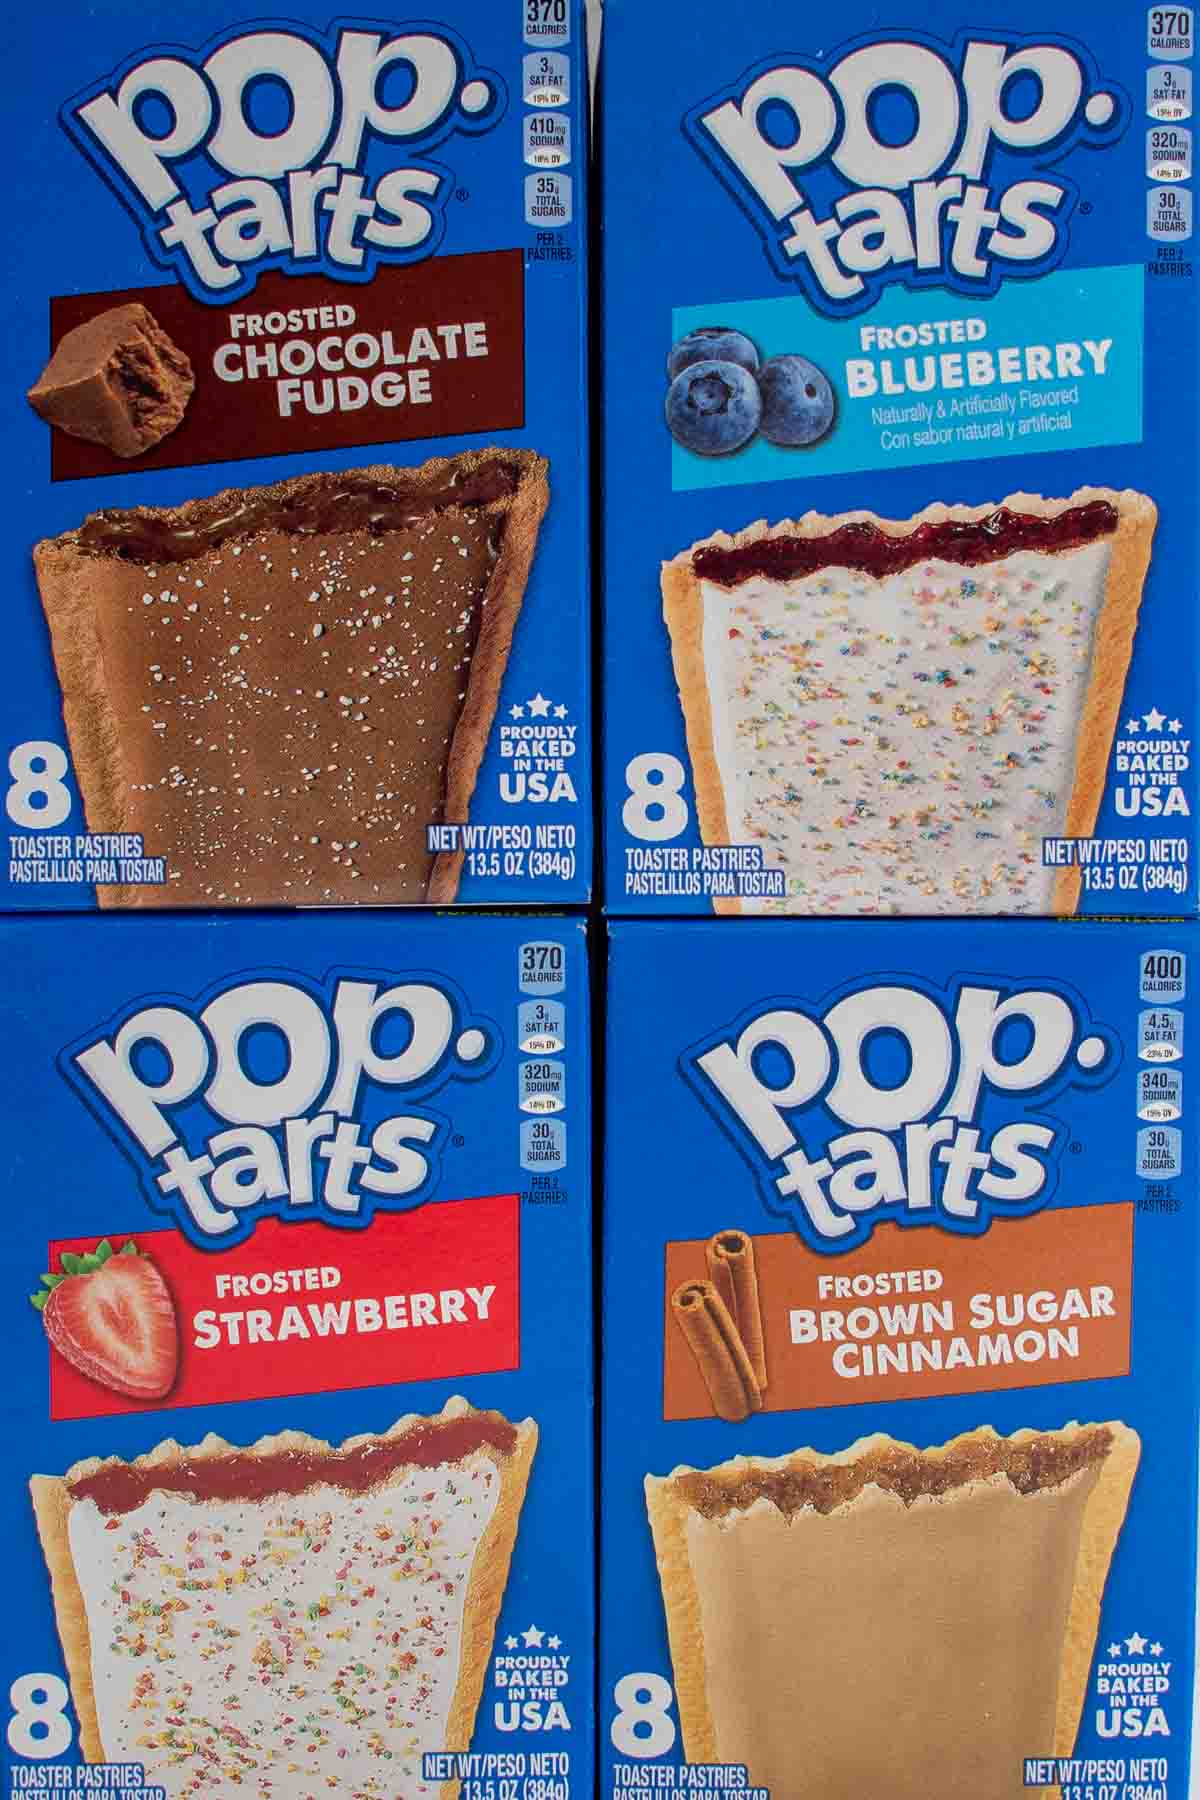 Assorted boxes of Pop Tarts.